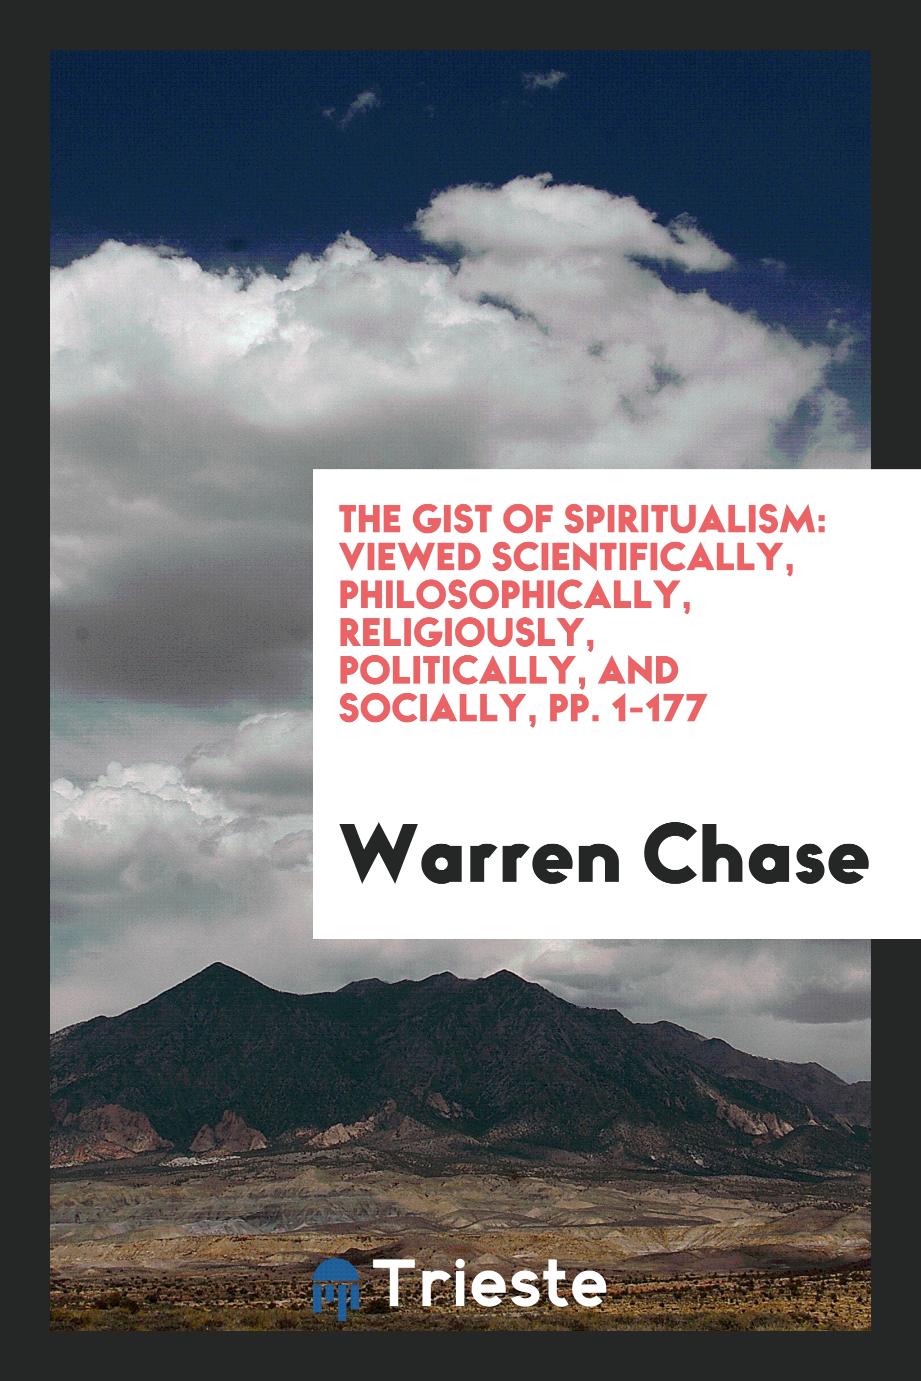 The Gist of Spiritualism: Viewed Scientifically, Philosophically, Religiously, Politically, and Socially, pp. 1-177